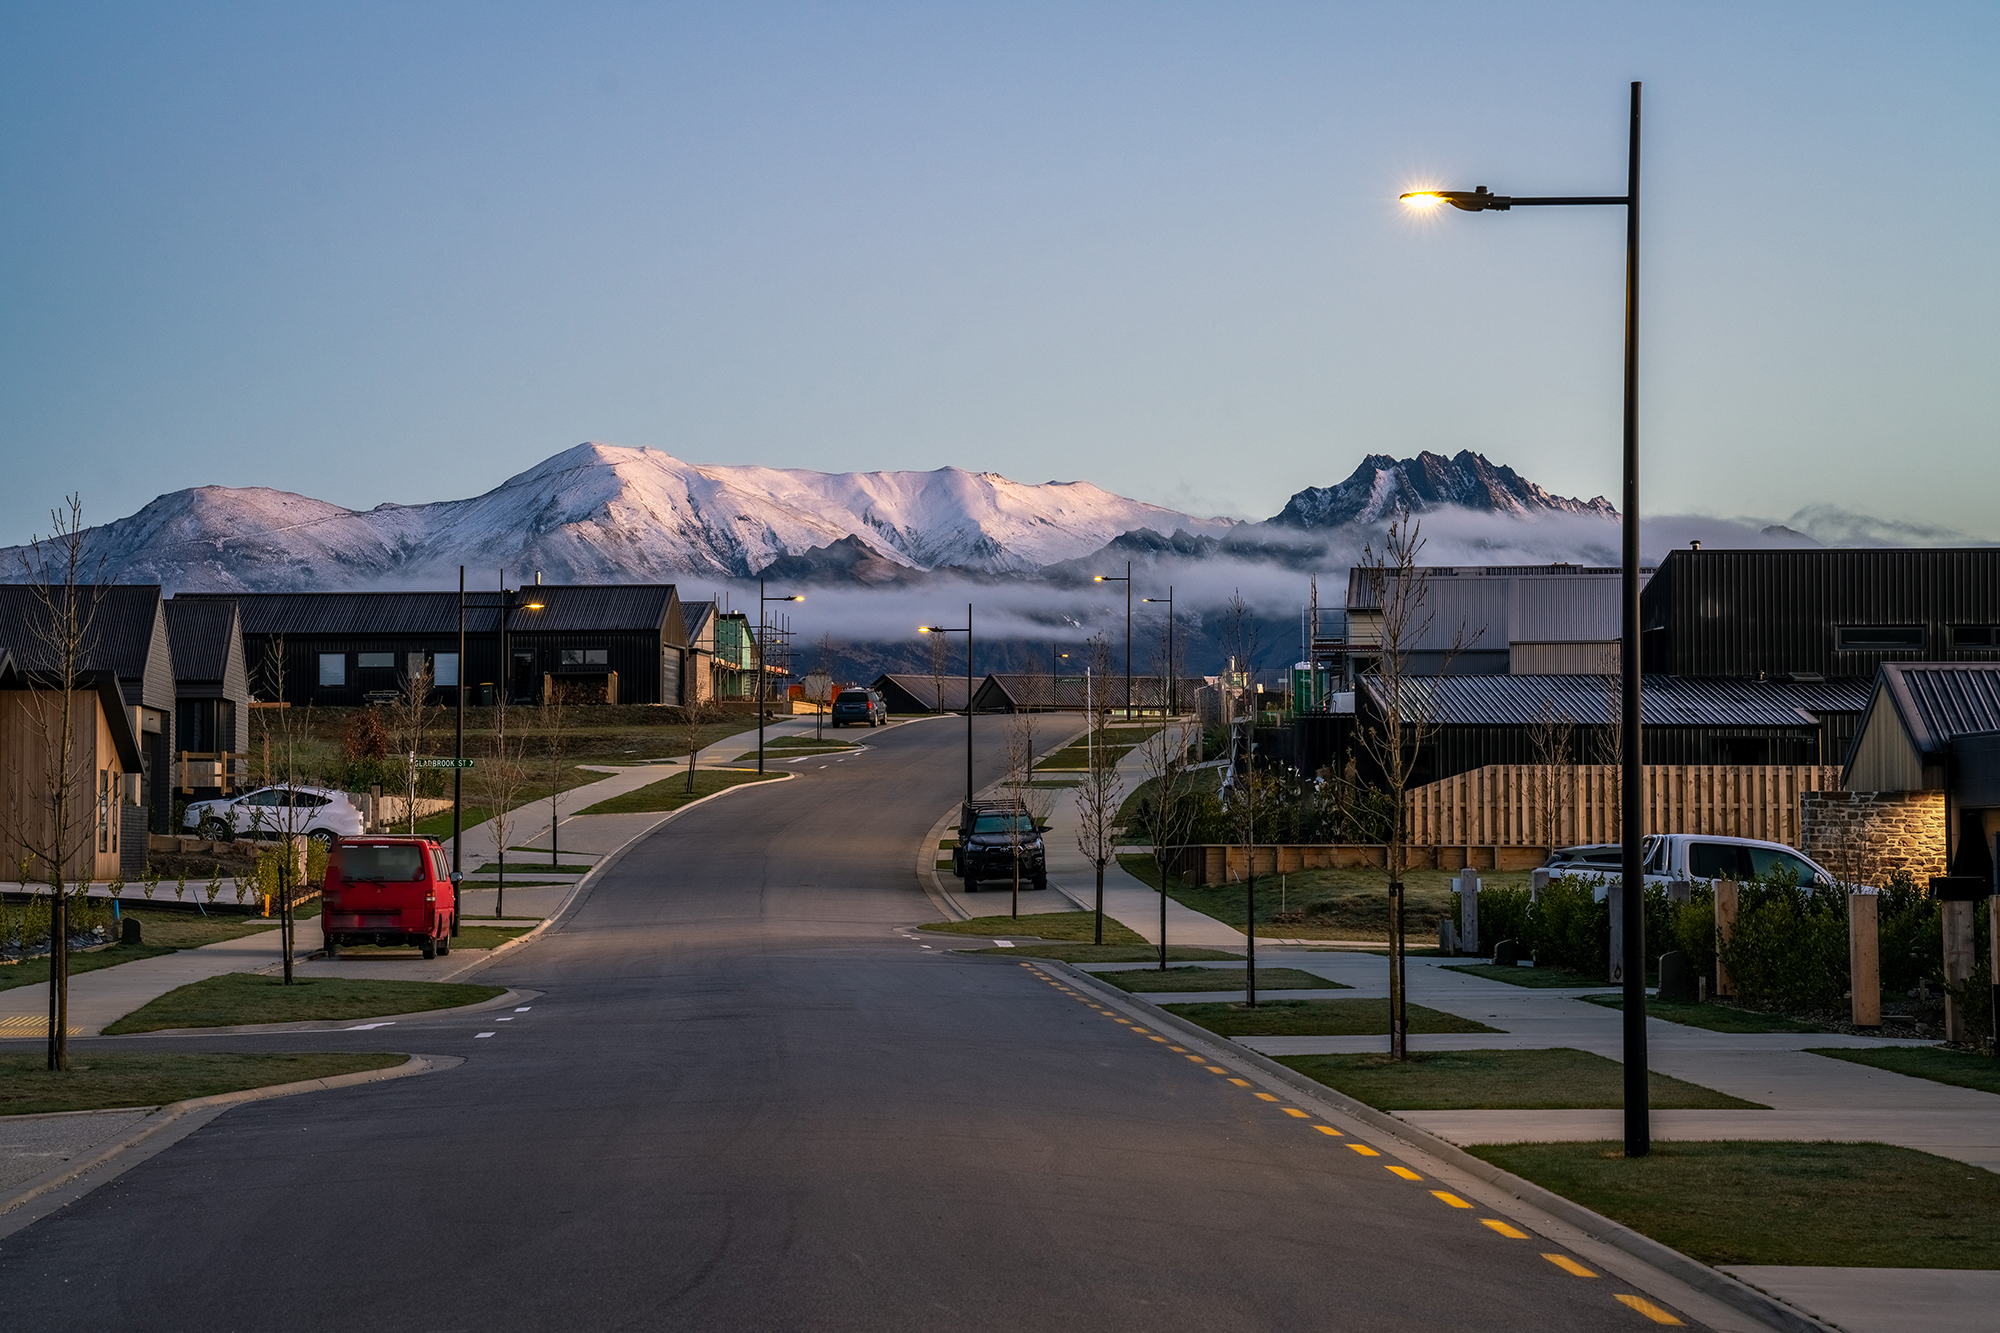 Northlake neighbourhood road at dusk illuminated by ibex lighting solutions with magnificent mountain in the background.